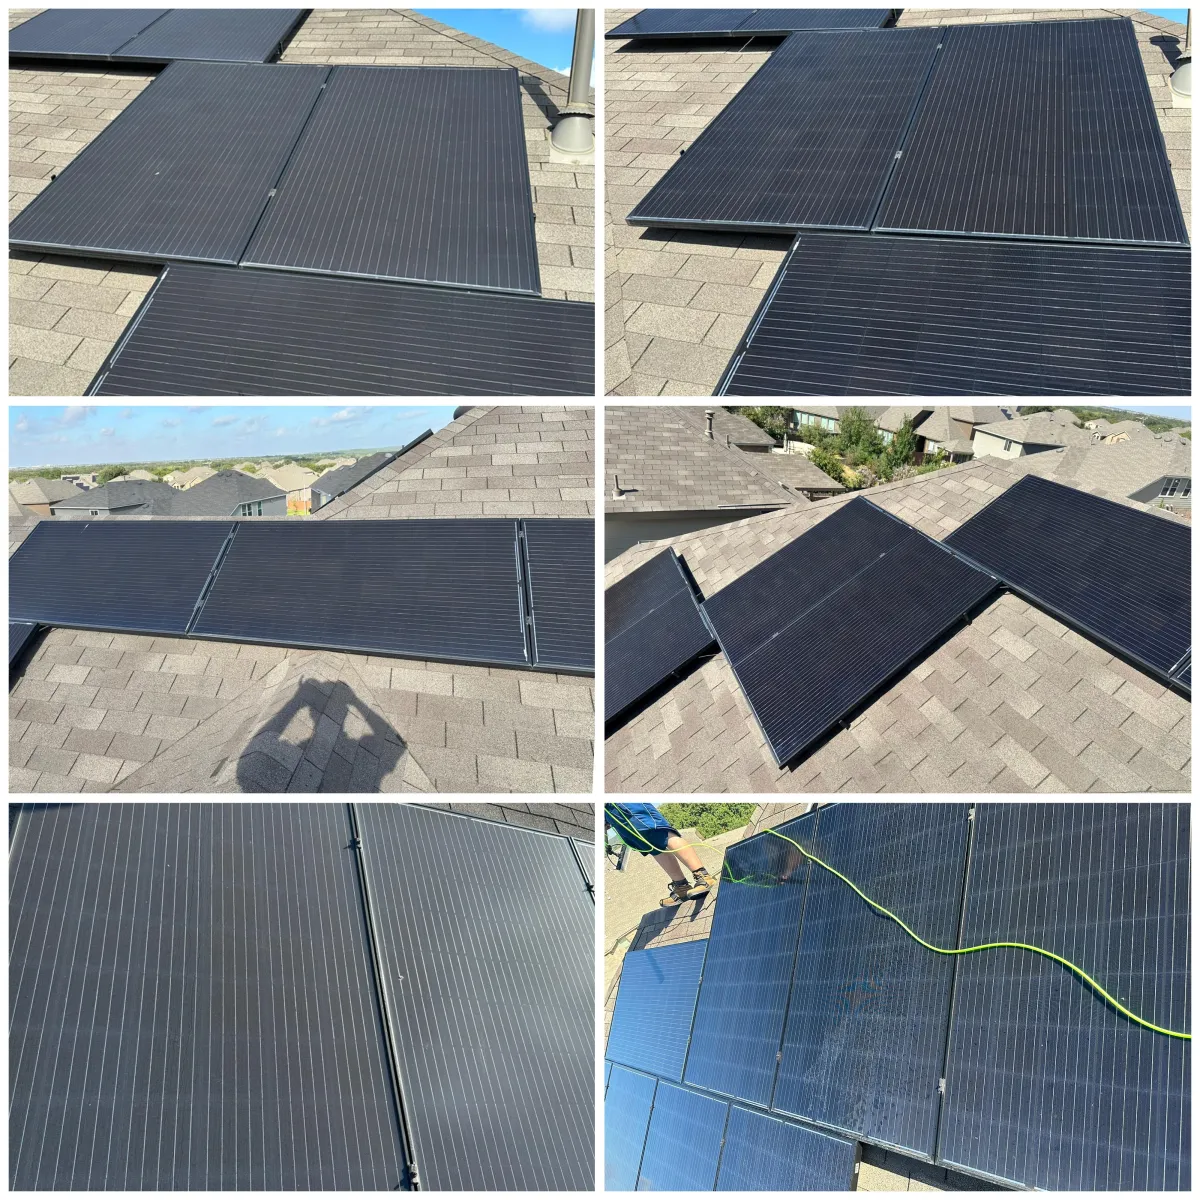 solar panel cleaning, solar panel washing, solar panel maintenance, solar panel power washing, solar panel power washing, solar panel cleaning services, solar panel cleaning services near me, solar panel cleaning services san antonio, solar panel cleaning company, professional solar panel cleaning, solar panel maintenance services, solar panel washing services near me, solar panel cleaning new braunfels, solar panel cleaning san marcos, solar panel cleaning seguin, solar panel cleaning boerne, solar panel cleaning castroville, window cleaning services near me, window cleaning company, window cleaning professional, gleam team exterior cleaning, window cleaning san antonio, morningstar window cleaning & pressure washing, squeegenius, true view window cleaners, window gang, abc home & commercial services, kelley property care, pressure washing, power washing, pressure cleaning, pressure washer, pressure cleaning services, exterior cleaning, roof cleaning, driveway cleaning, house washing, pressure washing san antonio, soft washing near me, affordable pressure washing, beyer pressure washing, prime time washing, texas exterior clean, danny's power washing, triton cleaning service, trash can cleaning, supreme power wash, exterior window washing, glass door cleaning, gutter cleaning, hardwater stain removal, interior window washing, mirror cleaning, window awning cleaning, mold removal, algae removal, brick cleaning, building cleaning, concrete cleaning, driveway cleaning, grime removal, garage cleaning, roof cleaning, siding cleaning, 